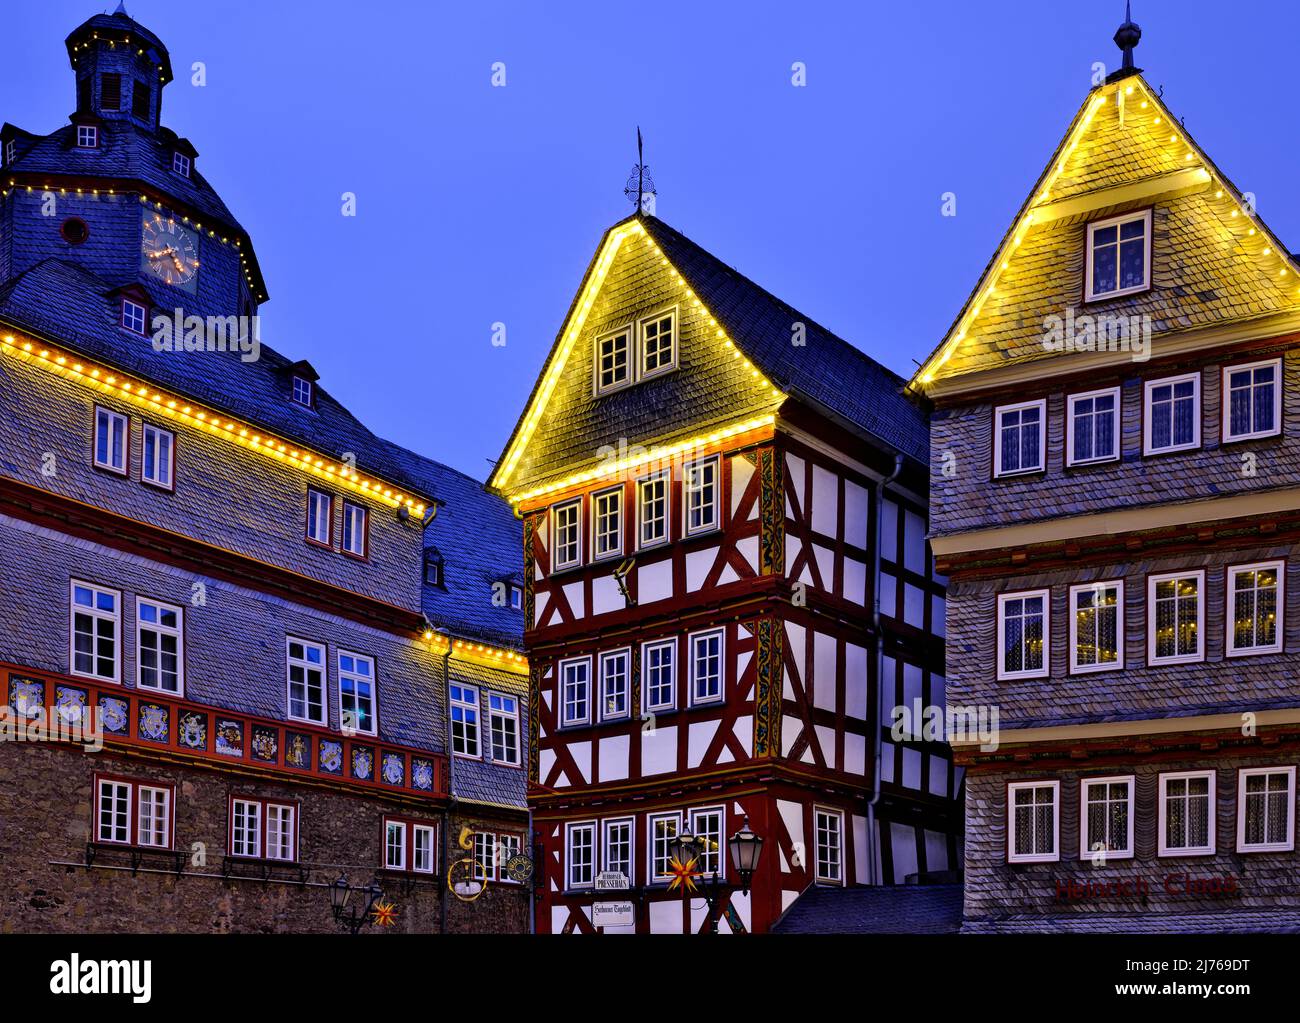 Europe, Germany, Hesse, city of Herborn, historical old town, Christmas, Christmas lights, town hall at market place Stock Photo